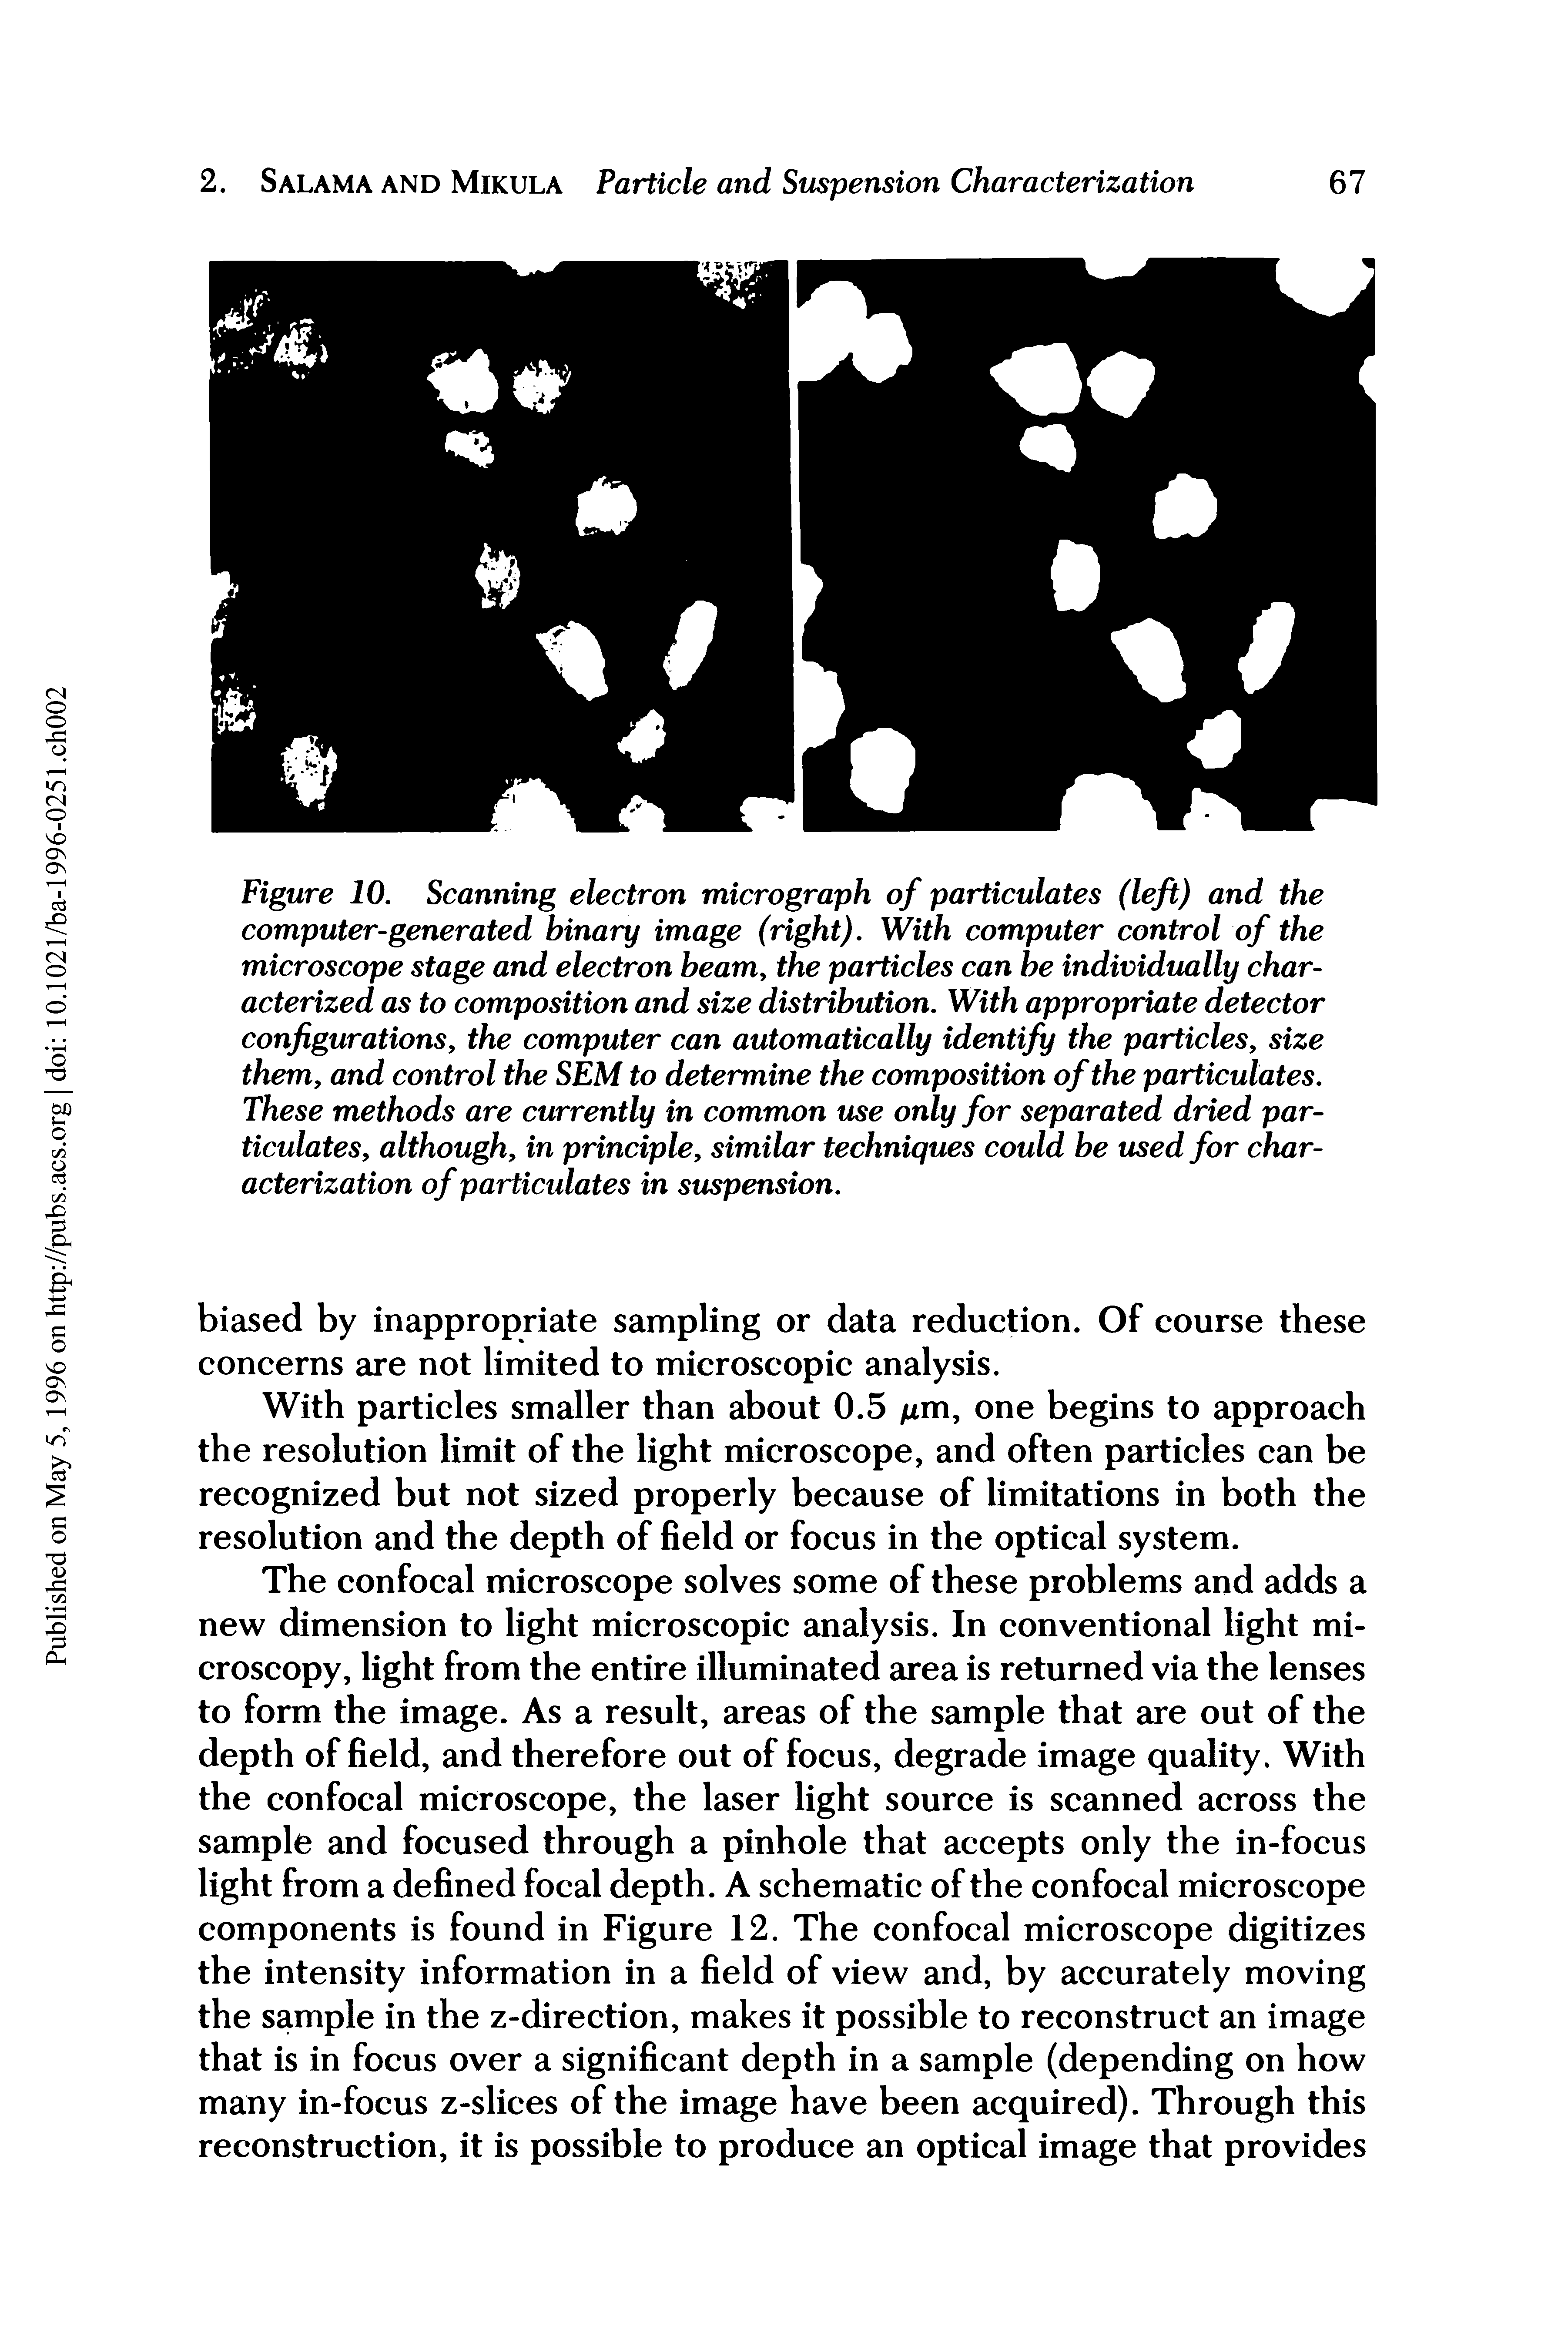 Figure 10. Scanning electron micrograph of particulates (left) and the computer-generated binary image (right). With computer control of the microscope stage and electron beam, the particles can be individually characterized as to composition and size distribution. With appropriate detector configurations, the computer can automatically identify the particles, size them, and control the SEM to determine the composition of the particulates. These methods are currently in common use only for separated dried particulates, although, in principle, similar techniques could be used for characterization of particulates in suspension.